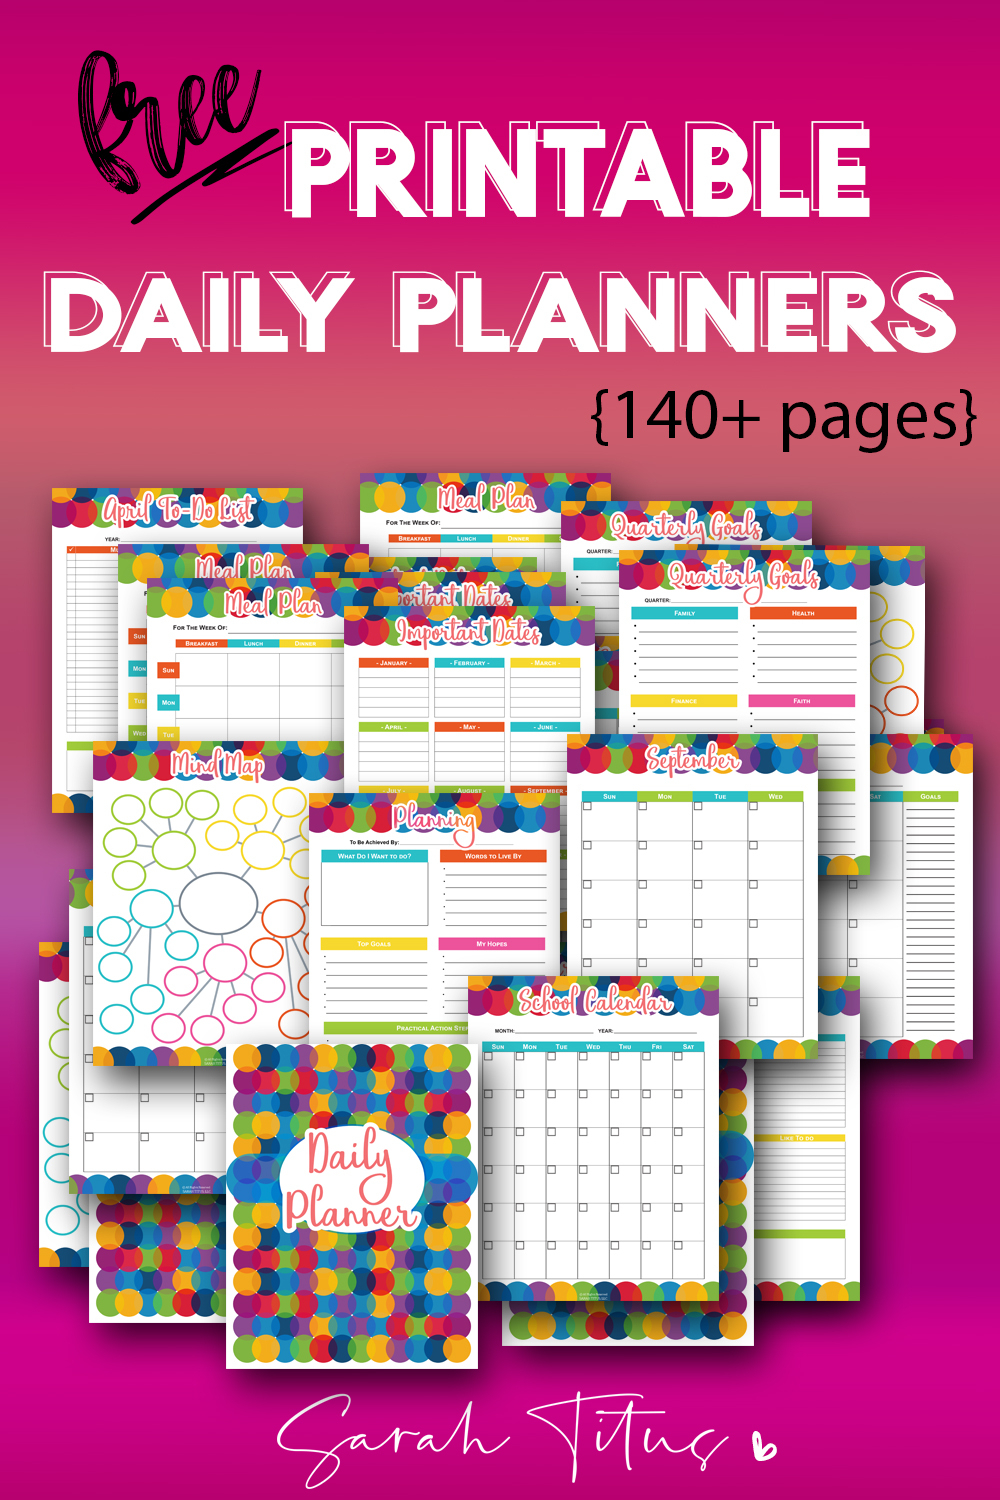 150 free printable daily planner templates that will save